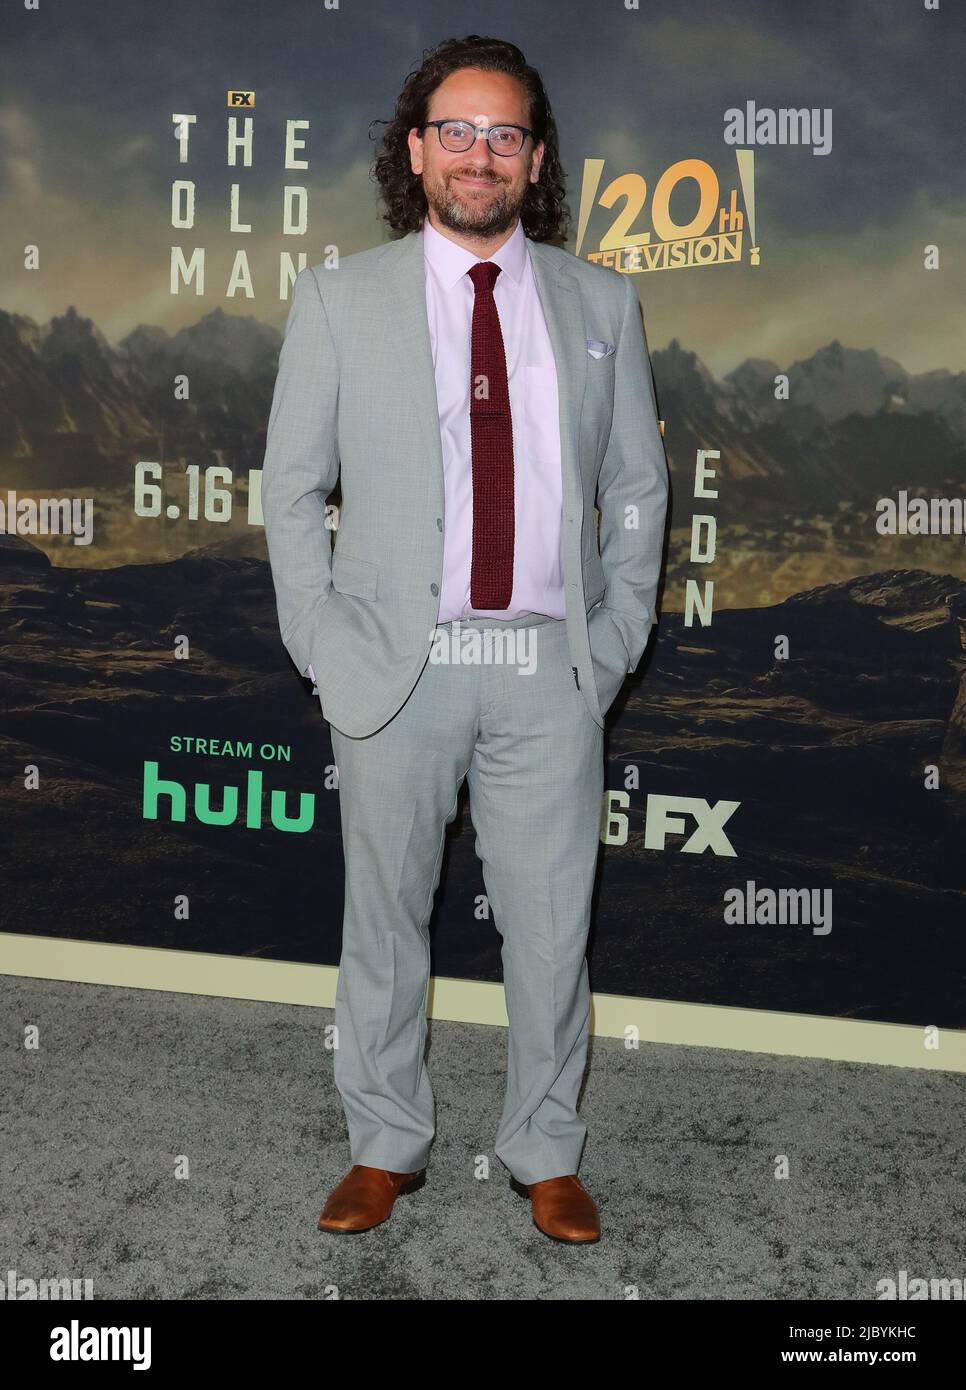 Los Angeles, USA. 08th June, 2022. Robert Levine arrives at The Old Man Season 1 Premiere Red Carpet held at The Academy Museum of Motion Pictures in Los Angeles, CA on Wednesday, June 8, 2022 . (Photo By Juan Pablo Rico/Sipa USA) Credit: Sipa USA/Alamy Live News Stock Photo